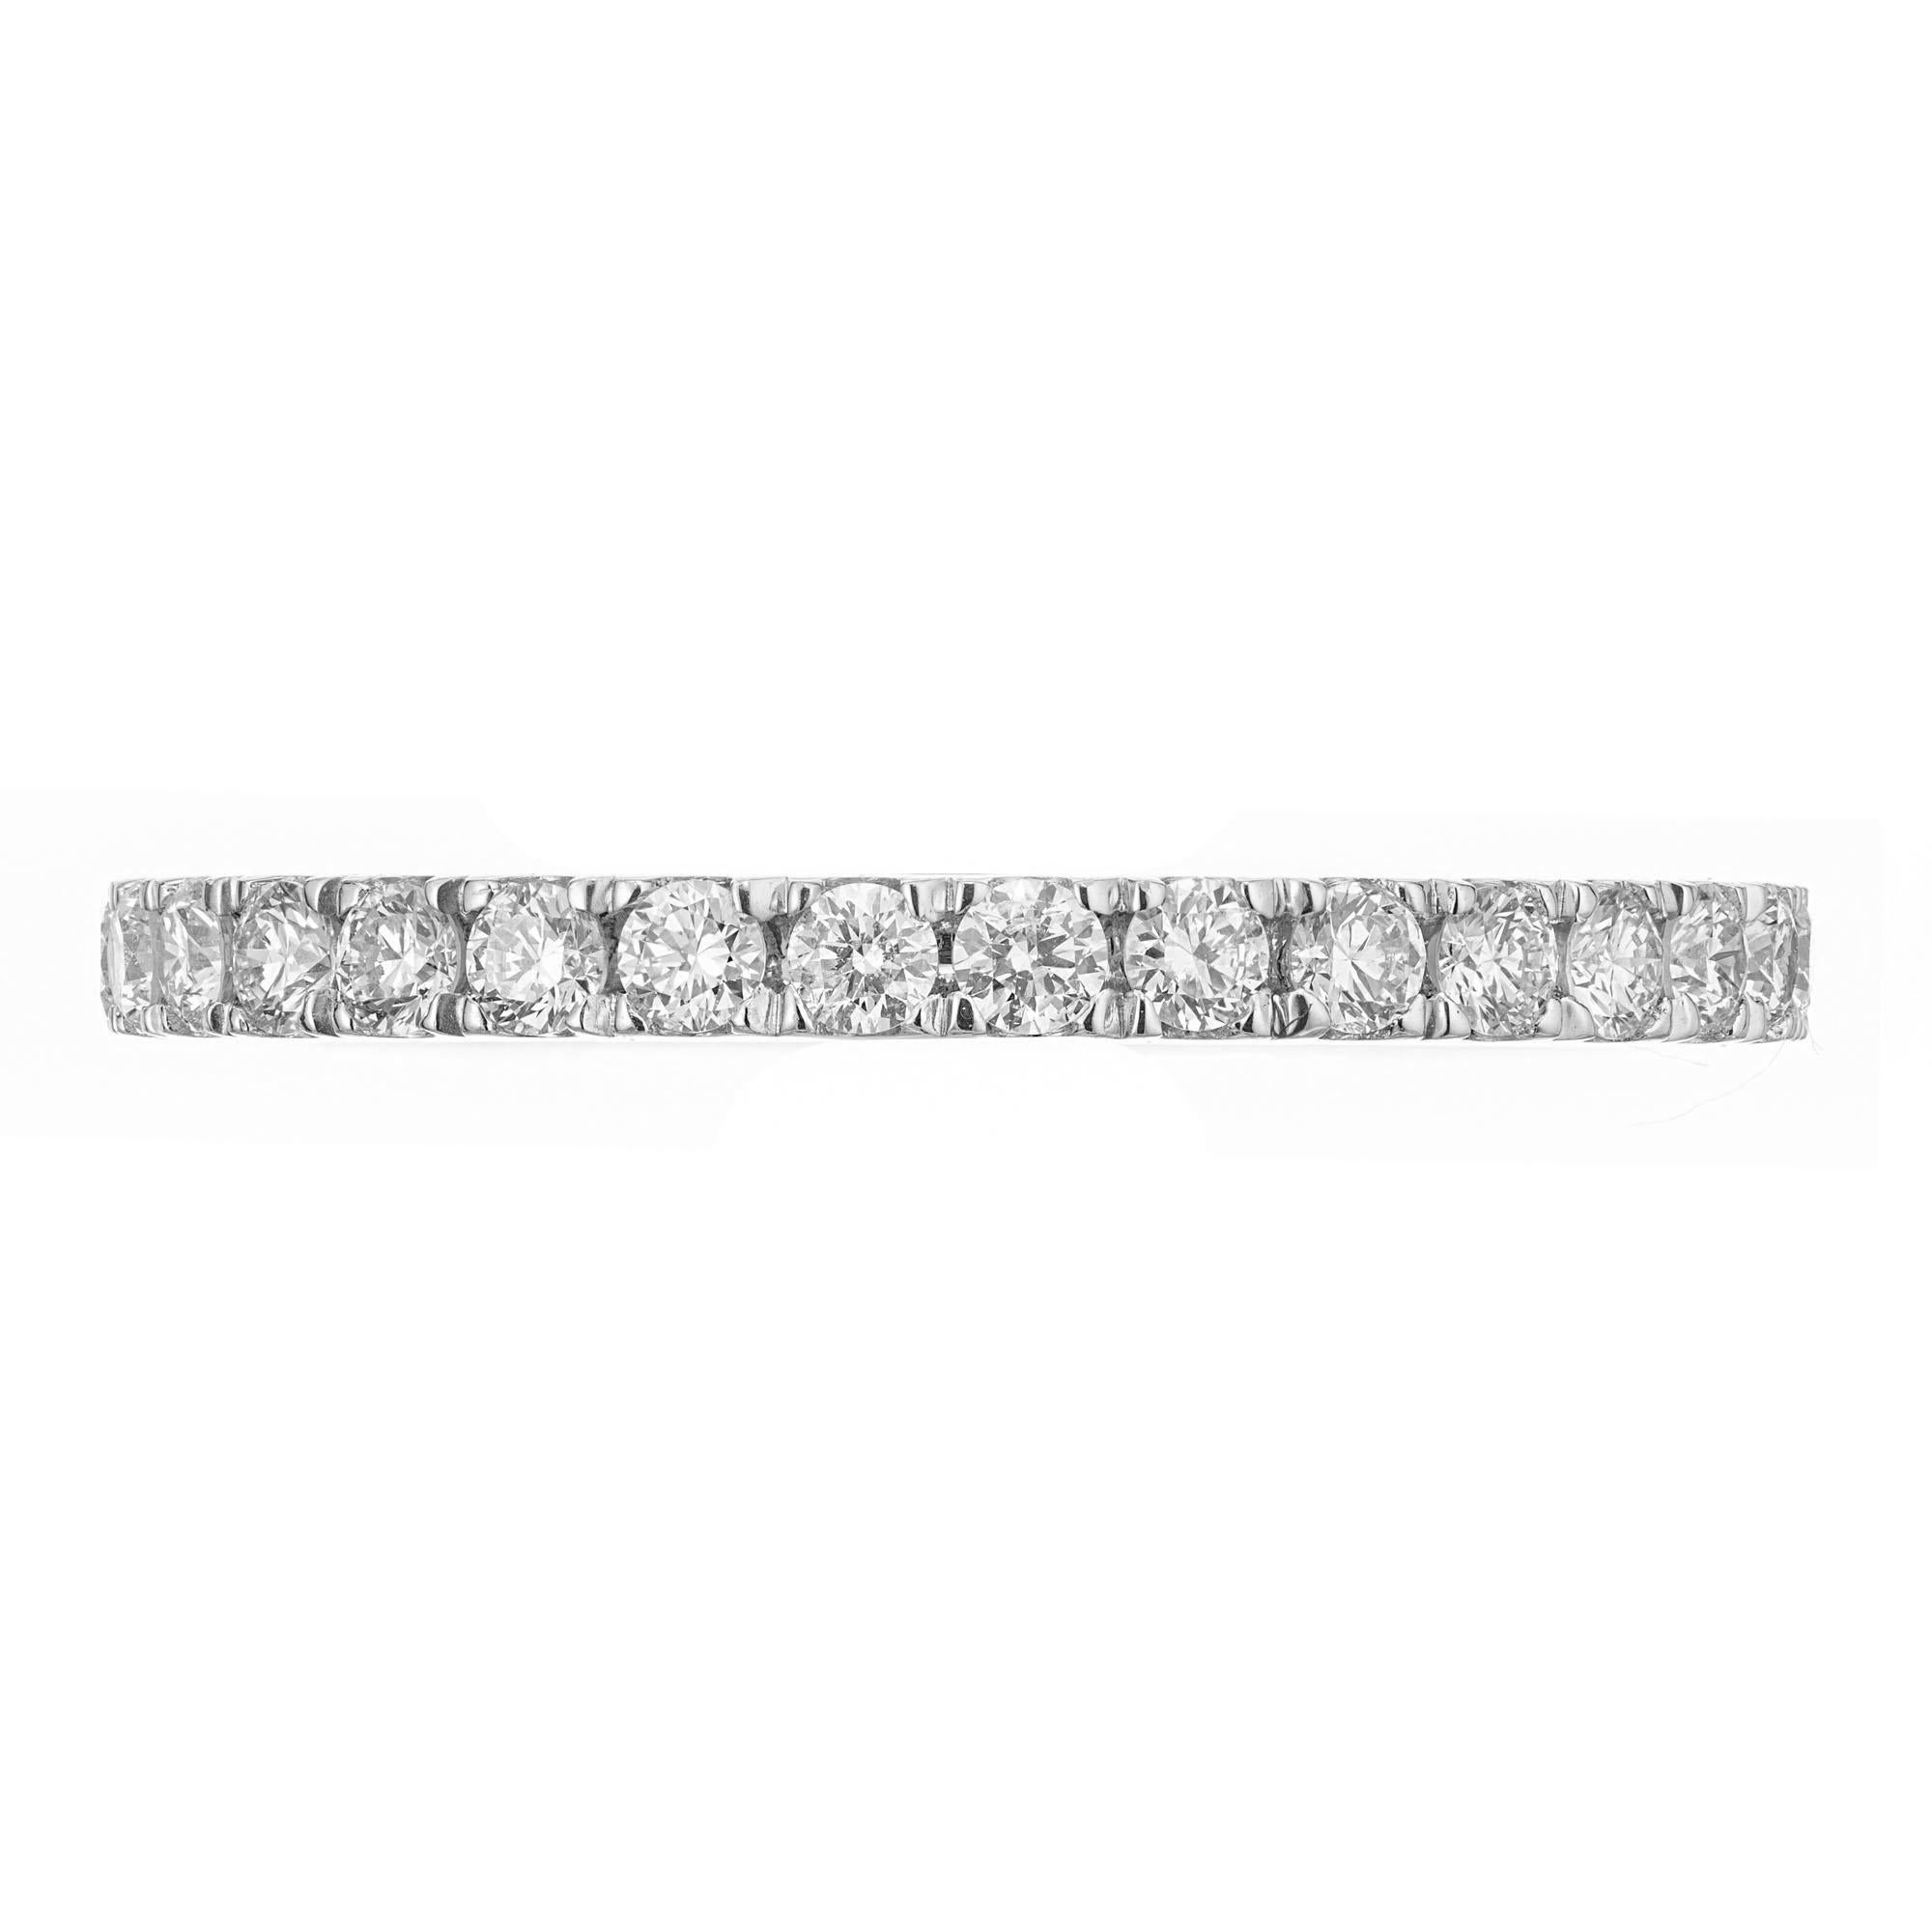 Diamond eternity ring. 31 round brilliant cut diamonds in a platinum, common prong eternity setting.  

31 round brilliant cut Diamonds, approx. total weight .77cts, H, VS – SI, 1.9mm 
Size 6.5 orders taken 
Platinum
Tested: Platinum 
Stamped: Pt950